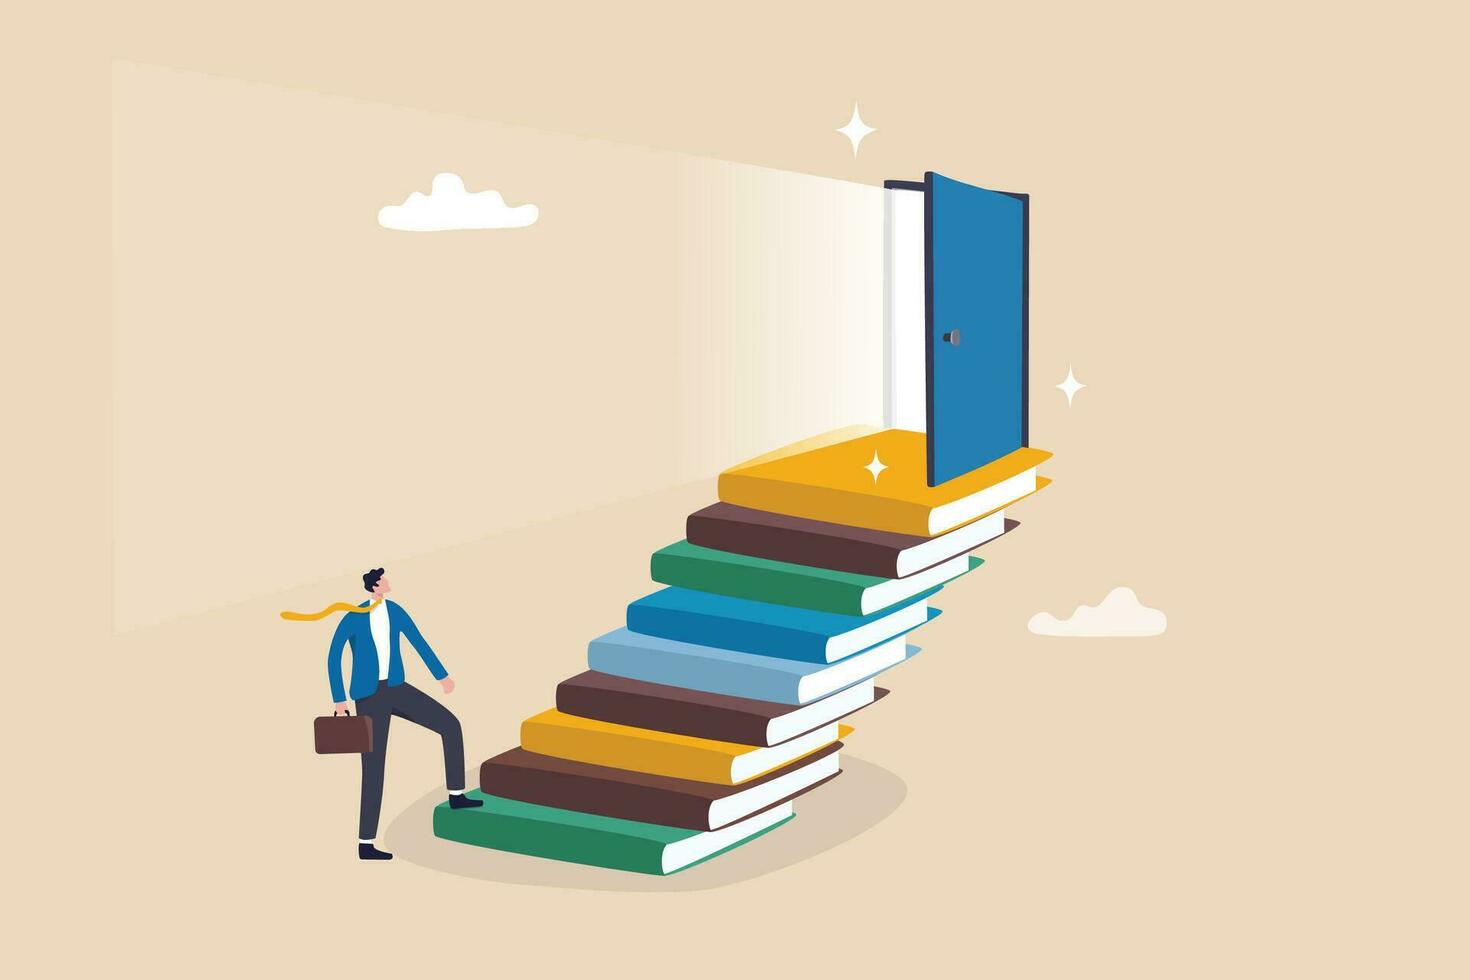 Education or learning for new opportunity, wisdom or knowledge to open door to success, solution, growth or career learning concept, businessman climb up book stack stair to reach opportunity door. vector